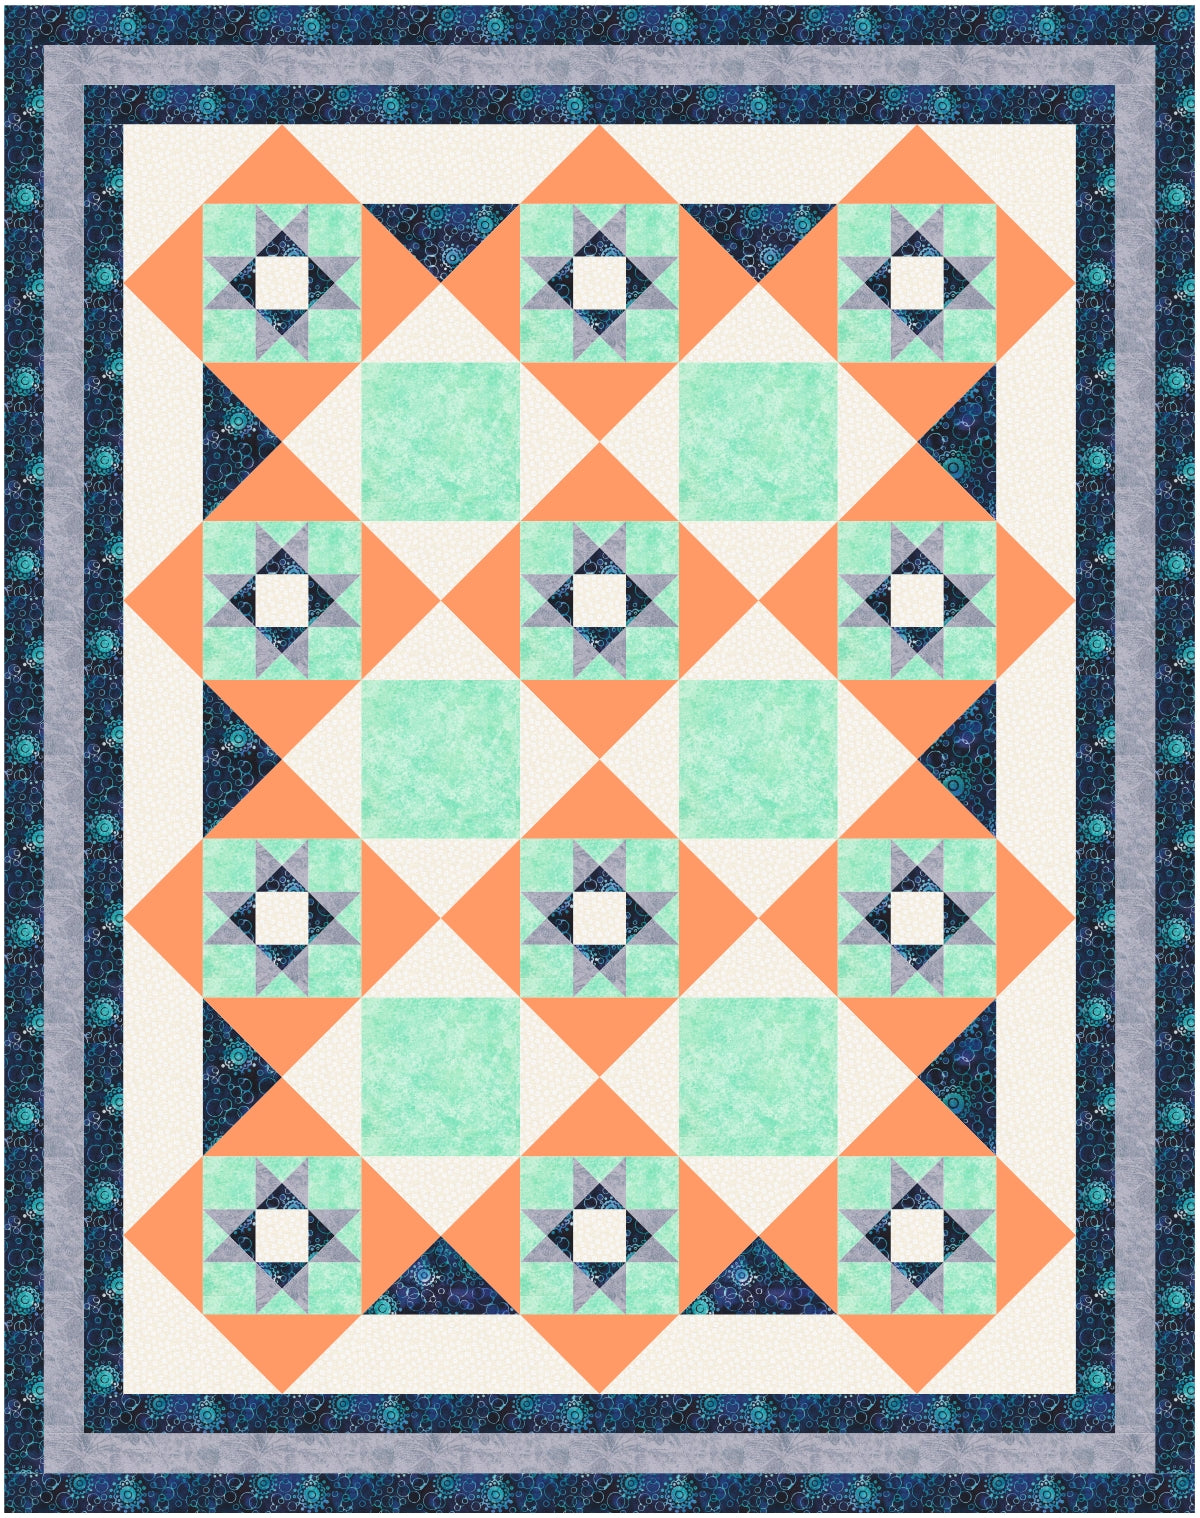 Furball Quilt Pattern by Beaquilter